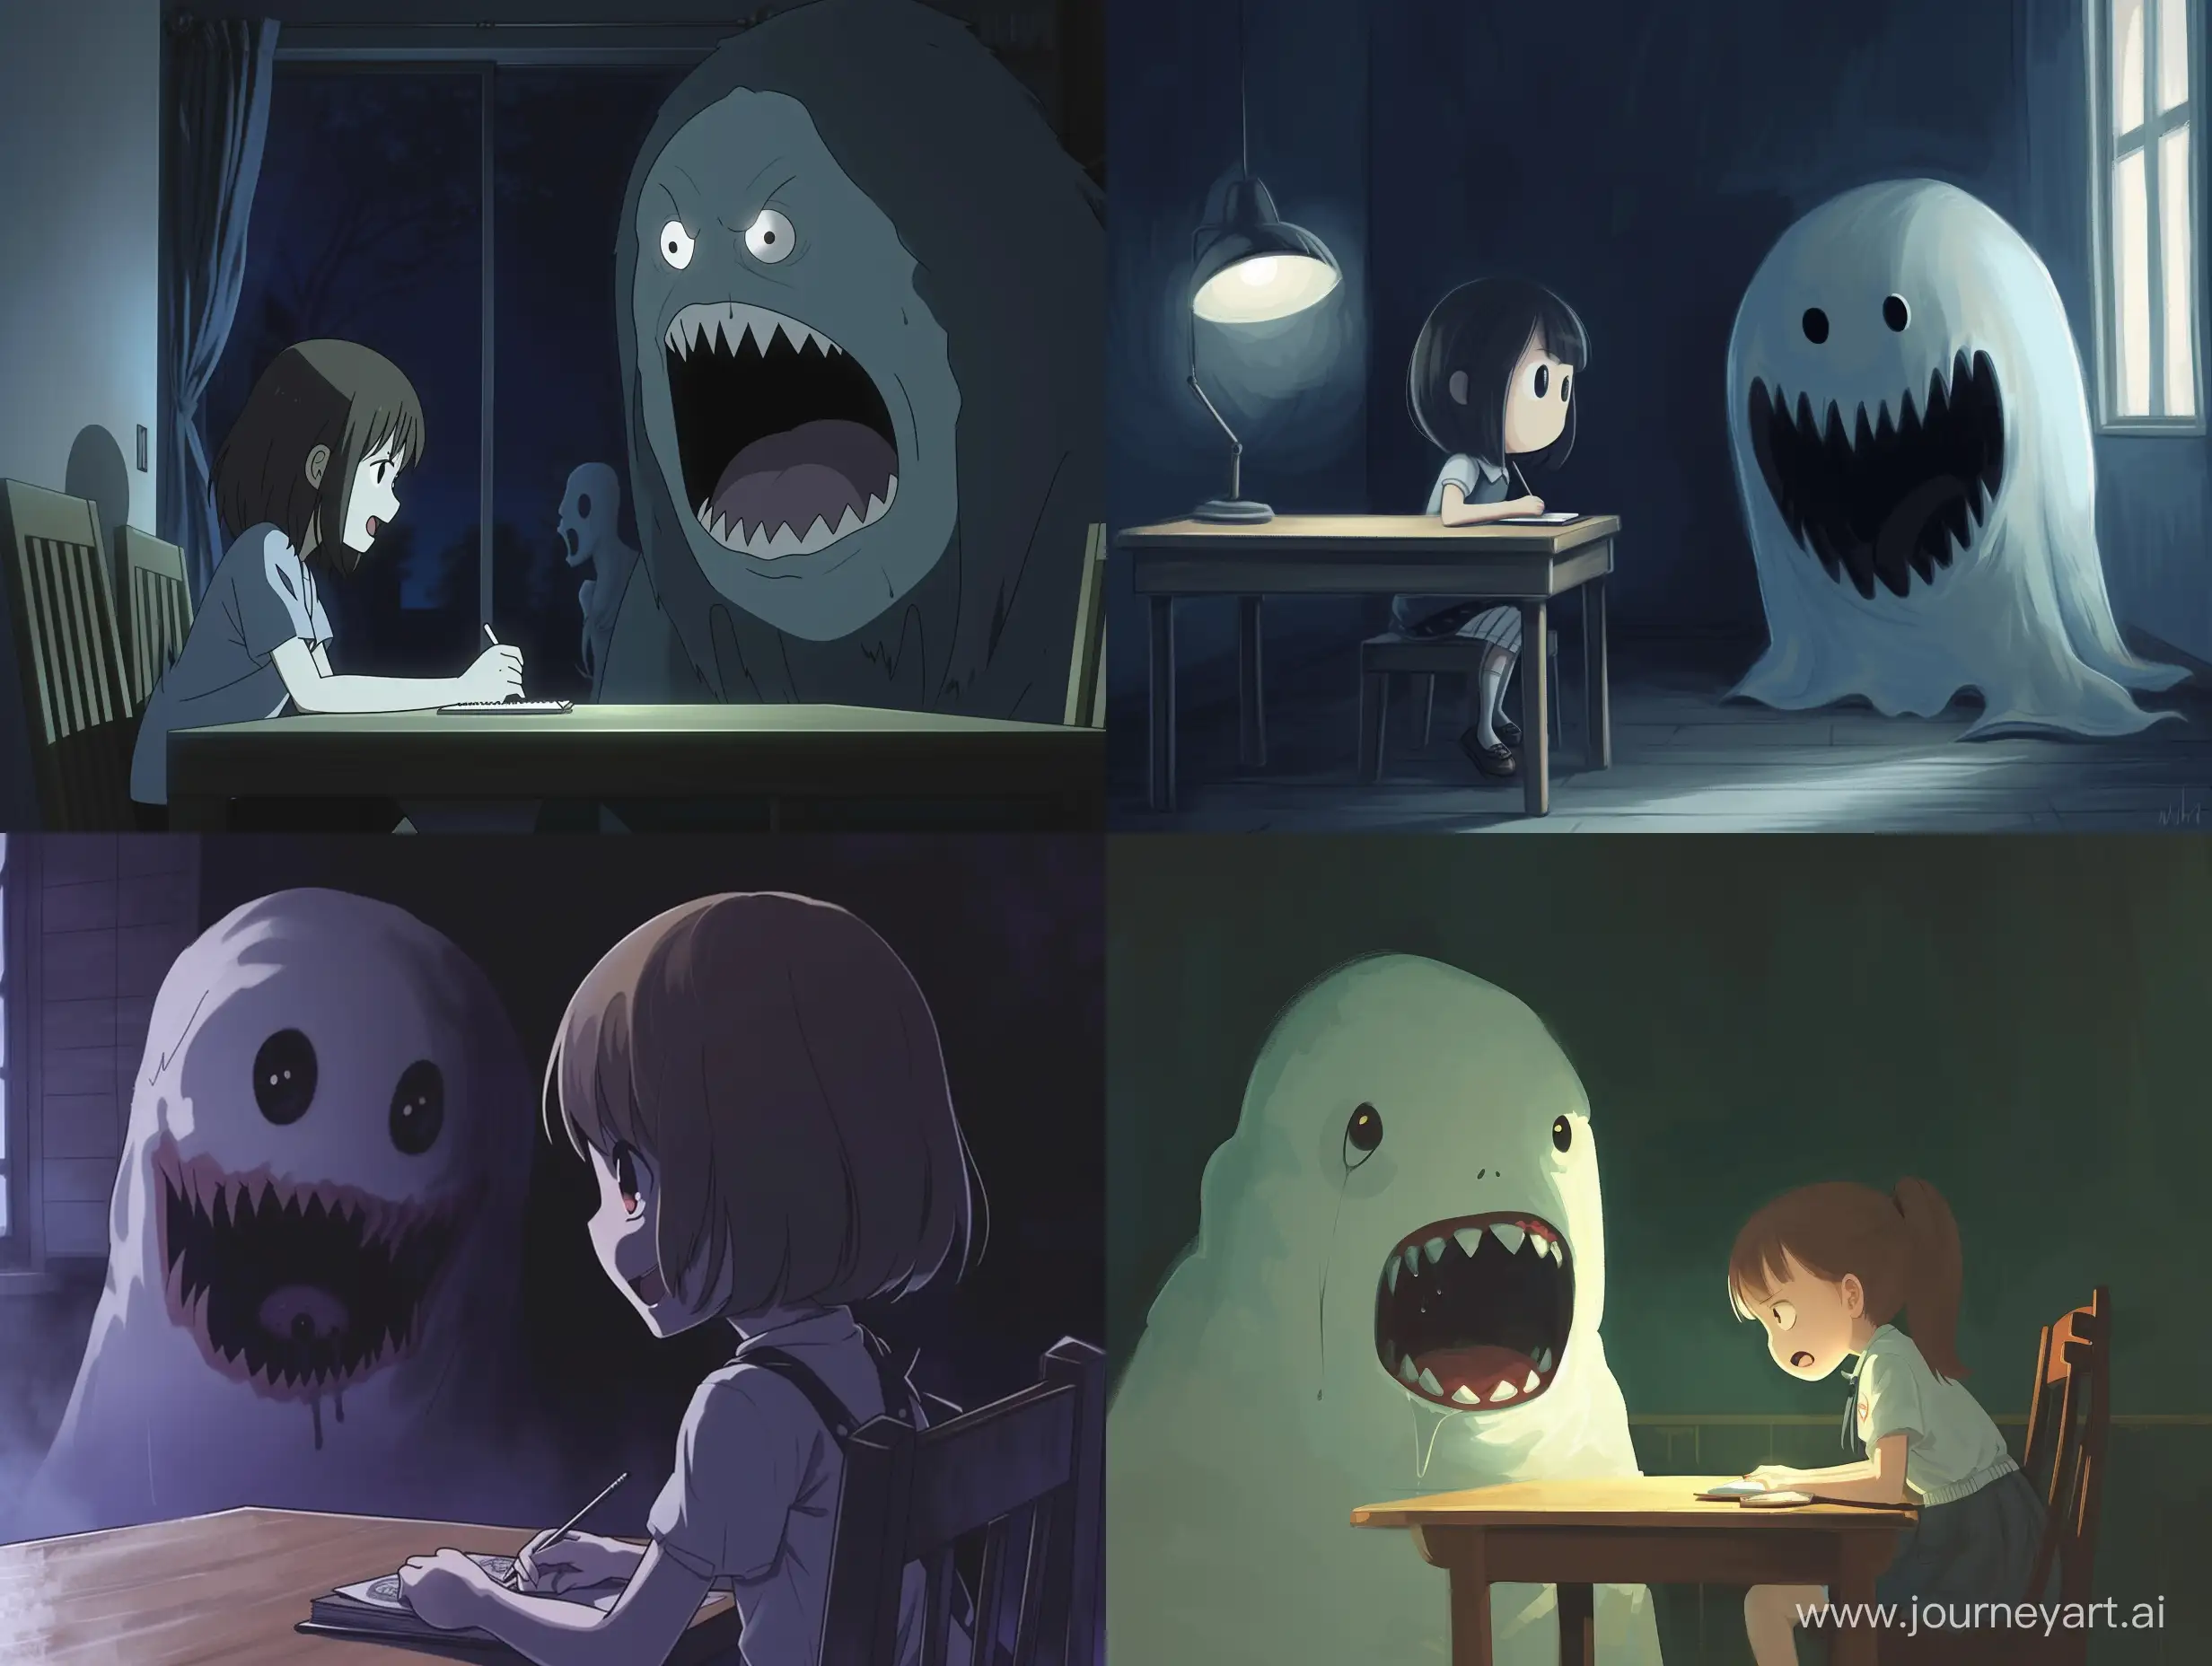 an anime scene, side view, slightly chibi style, big head, a girl with medium hair is sitting by the table to do homework, night time, low light, behind her is a ghost with wide open mouth and evil eyes, the girl is calm, best quality 